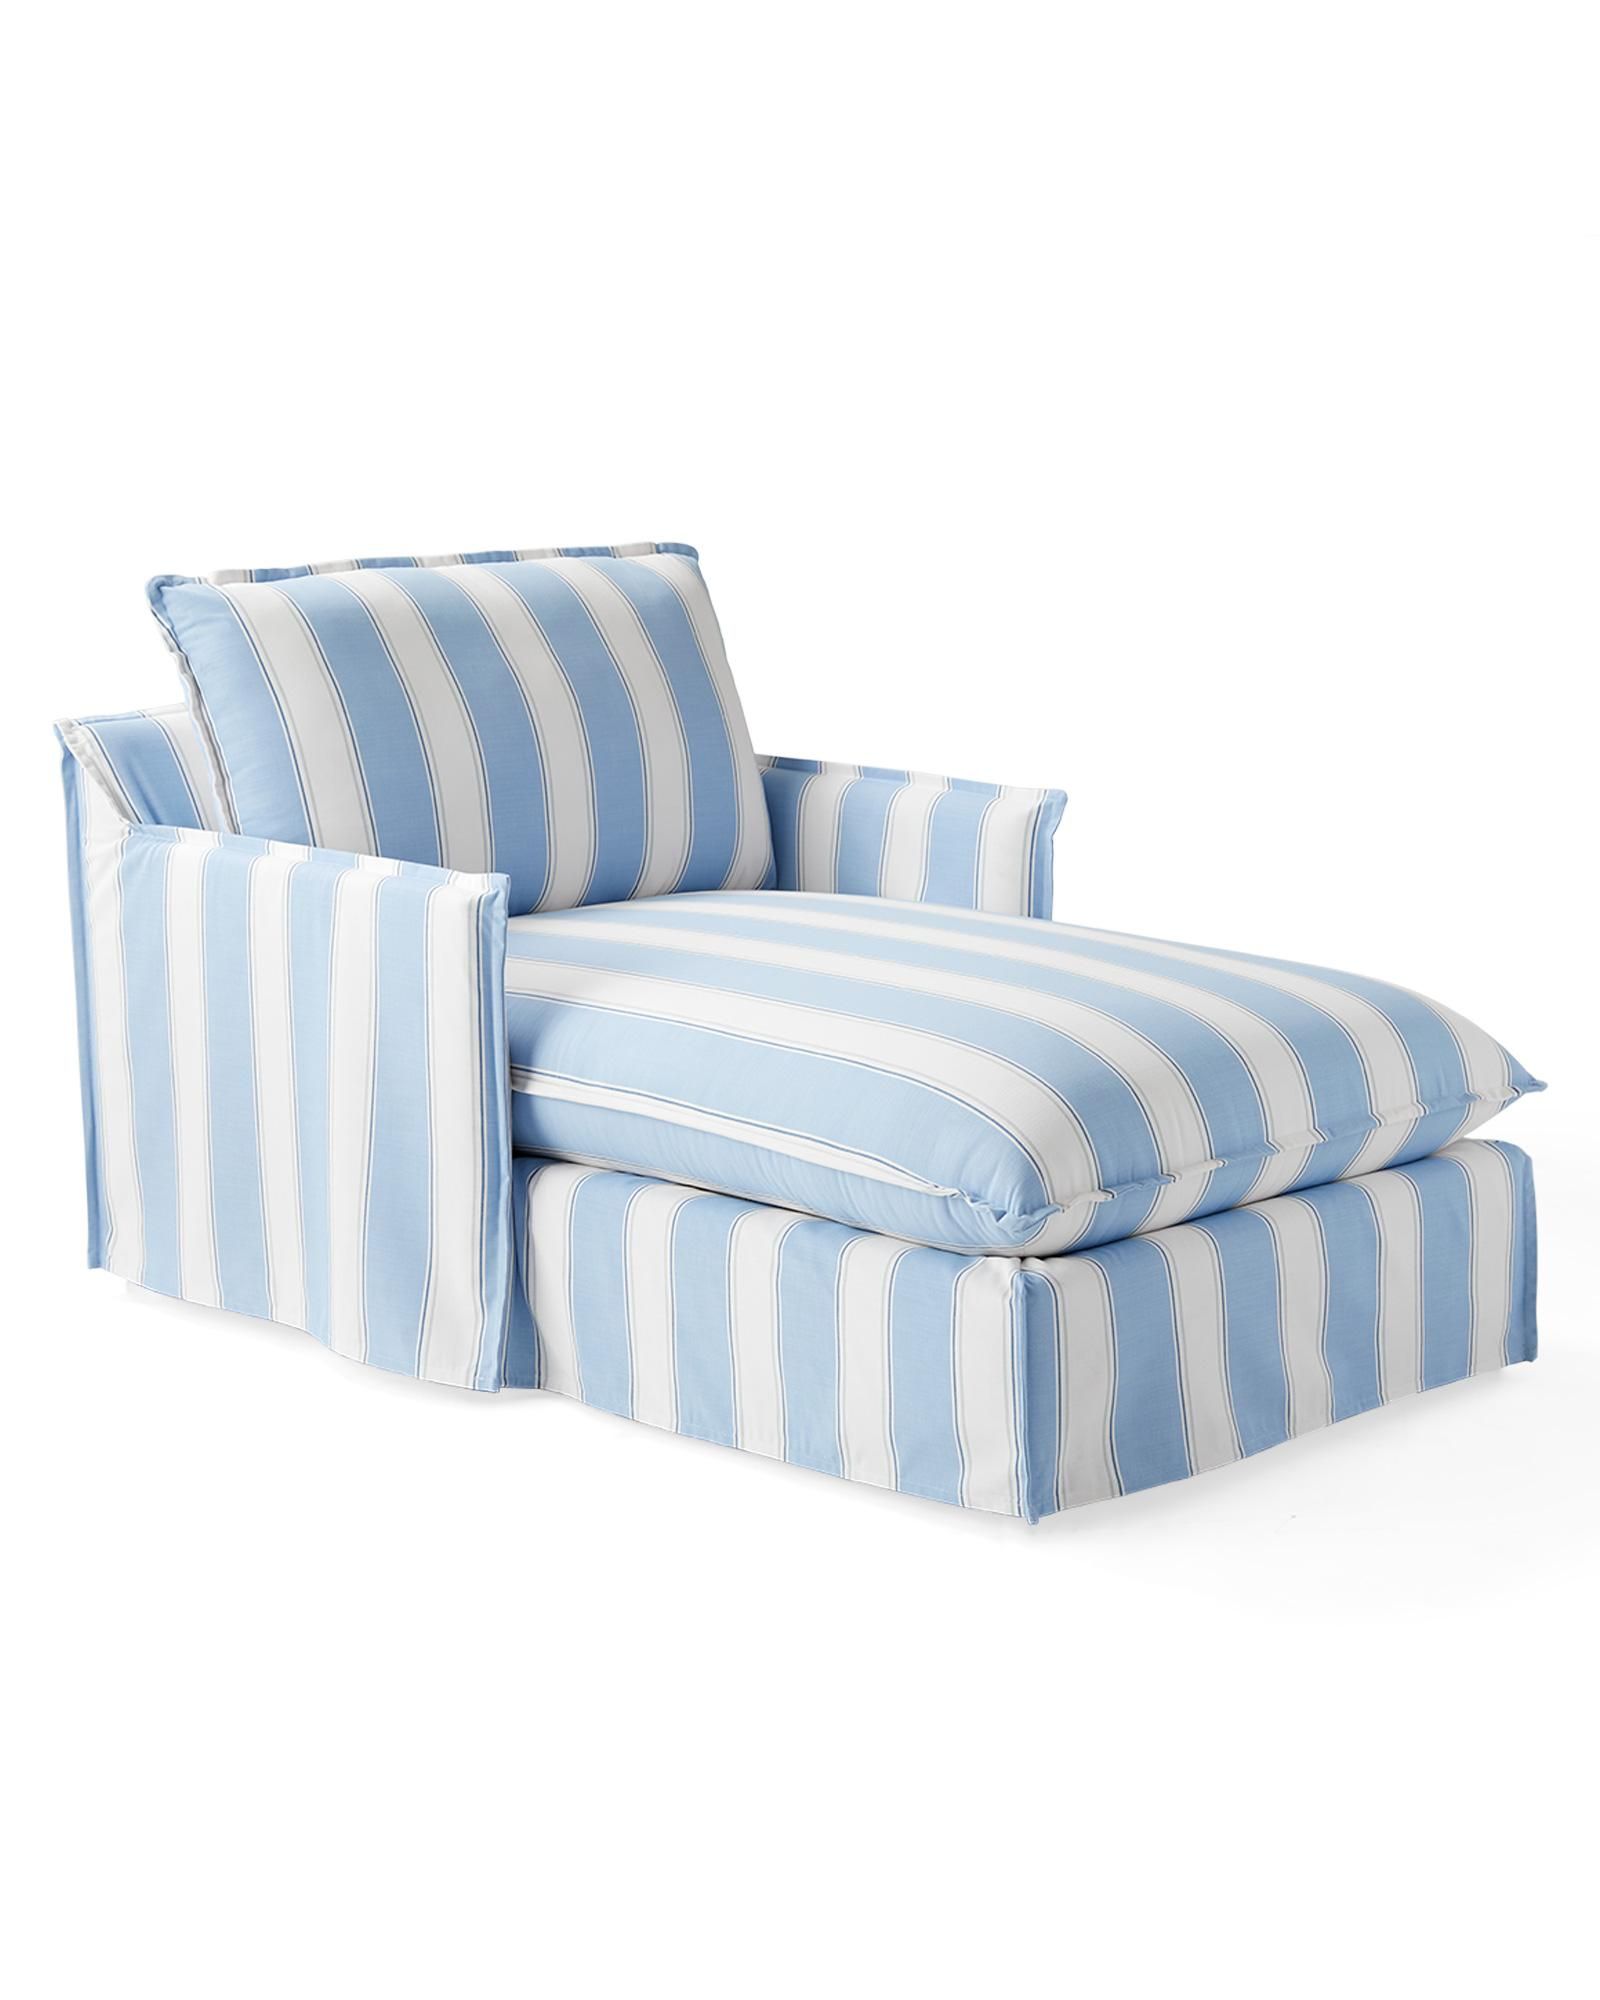 Sundial Wide Chaise - Hydrangea Port Stripe | Serena and Lily